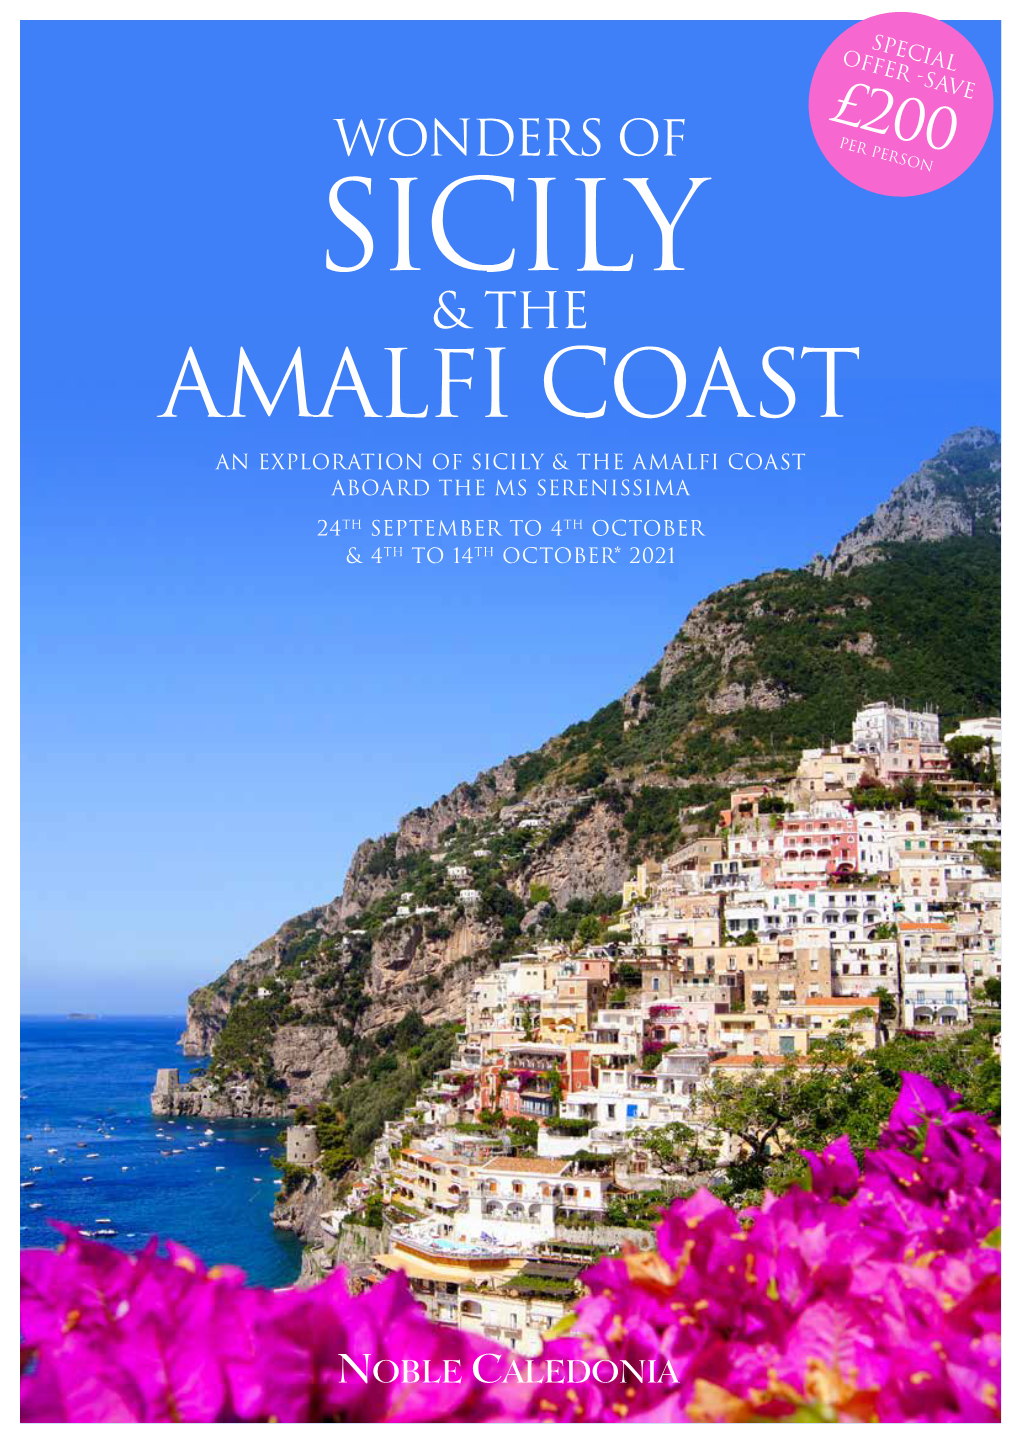 AMALFI COAST an EXPLORATION of SICILY & the AMALFI COAST ABOARD the MS SERENISSIMA 24TH SEPTEMBER to 4TH OCTOBER & 4TH to 14TH OCTOBER* 2021 Taormina Naples